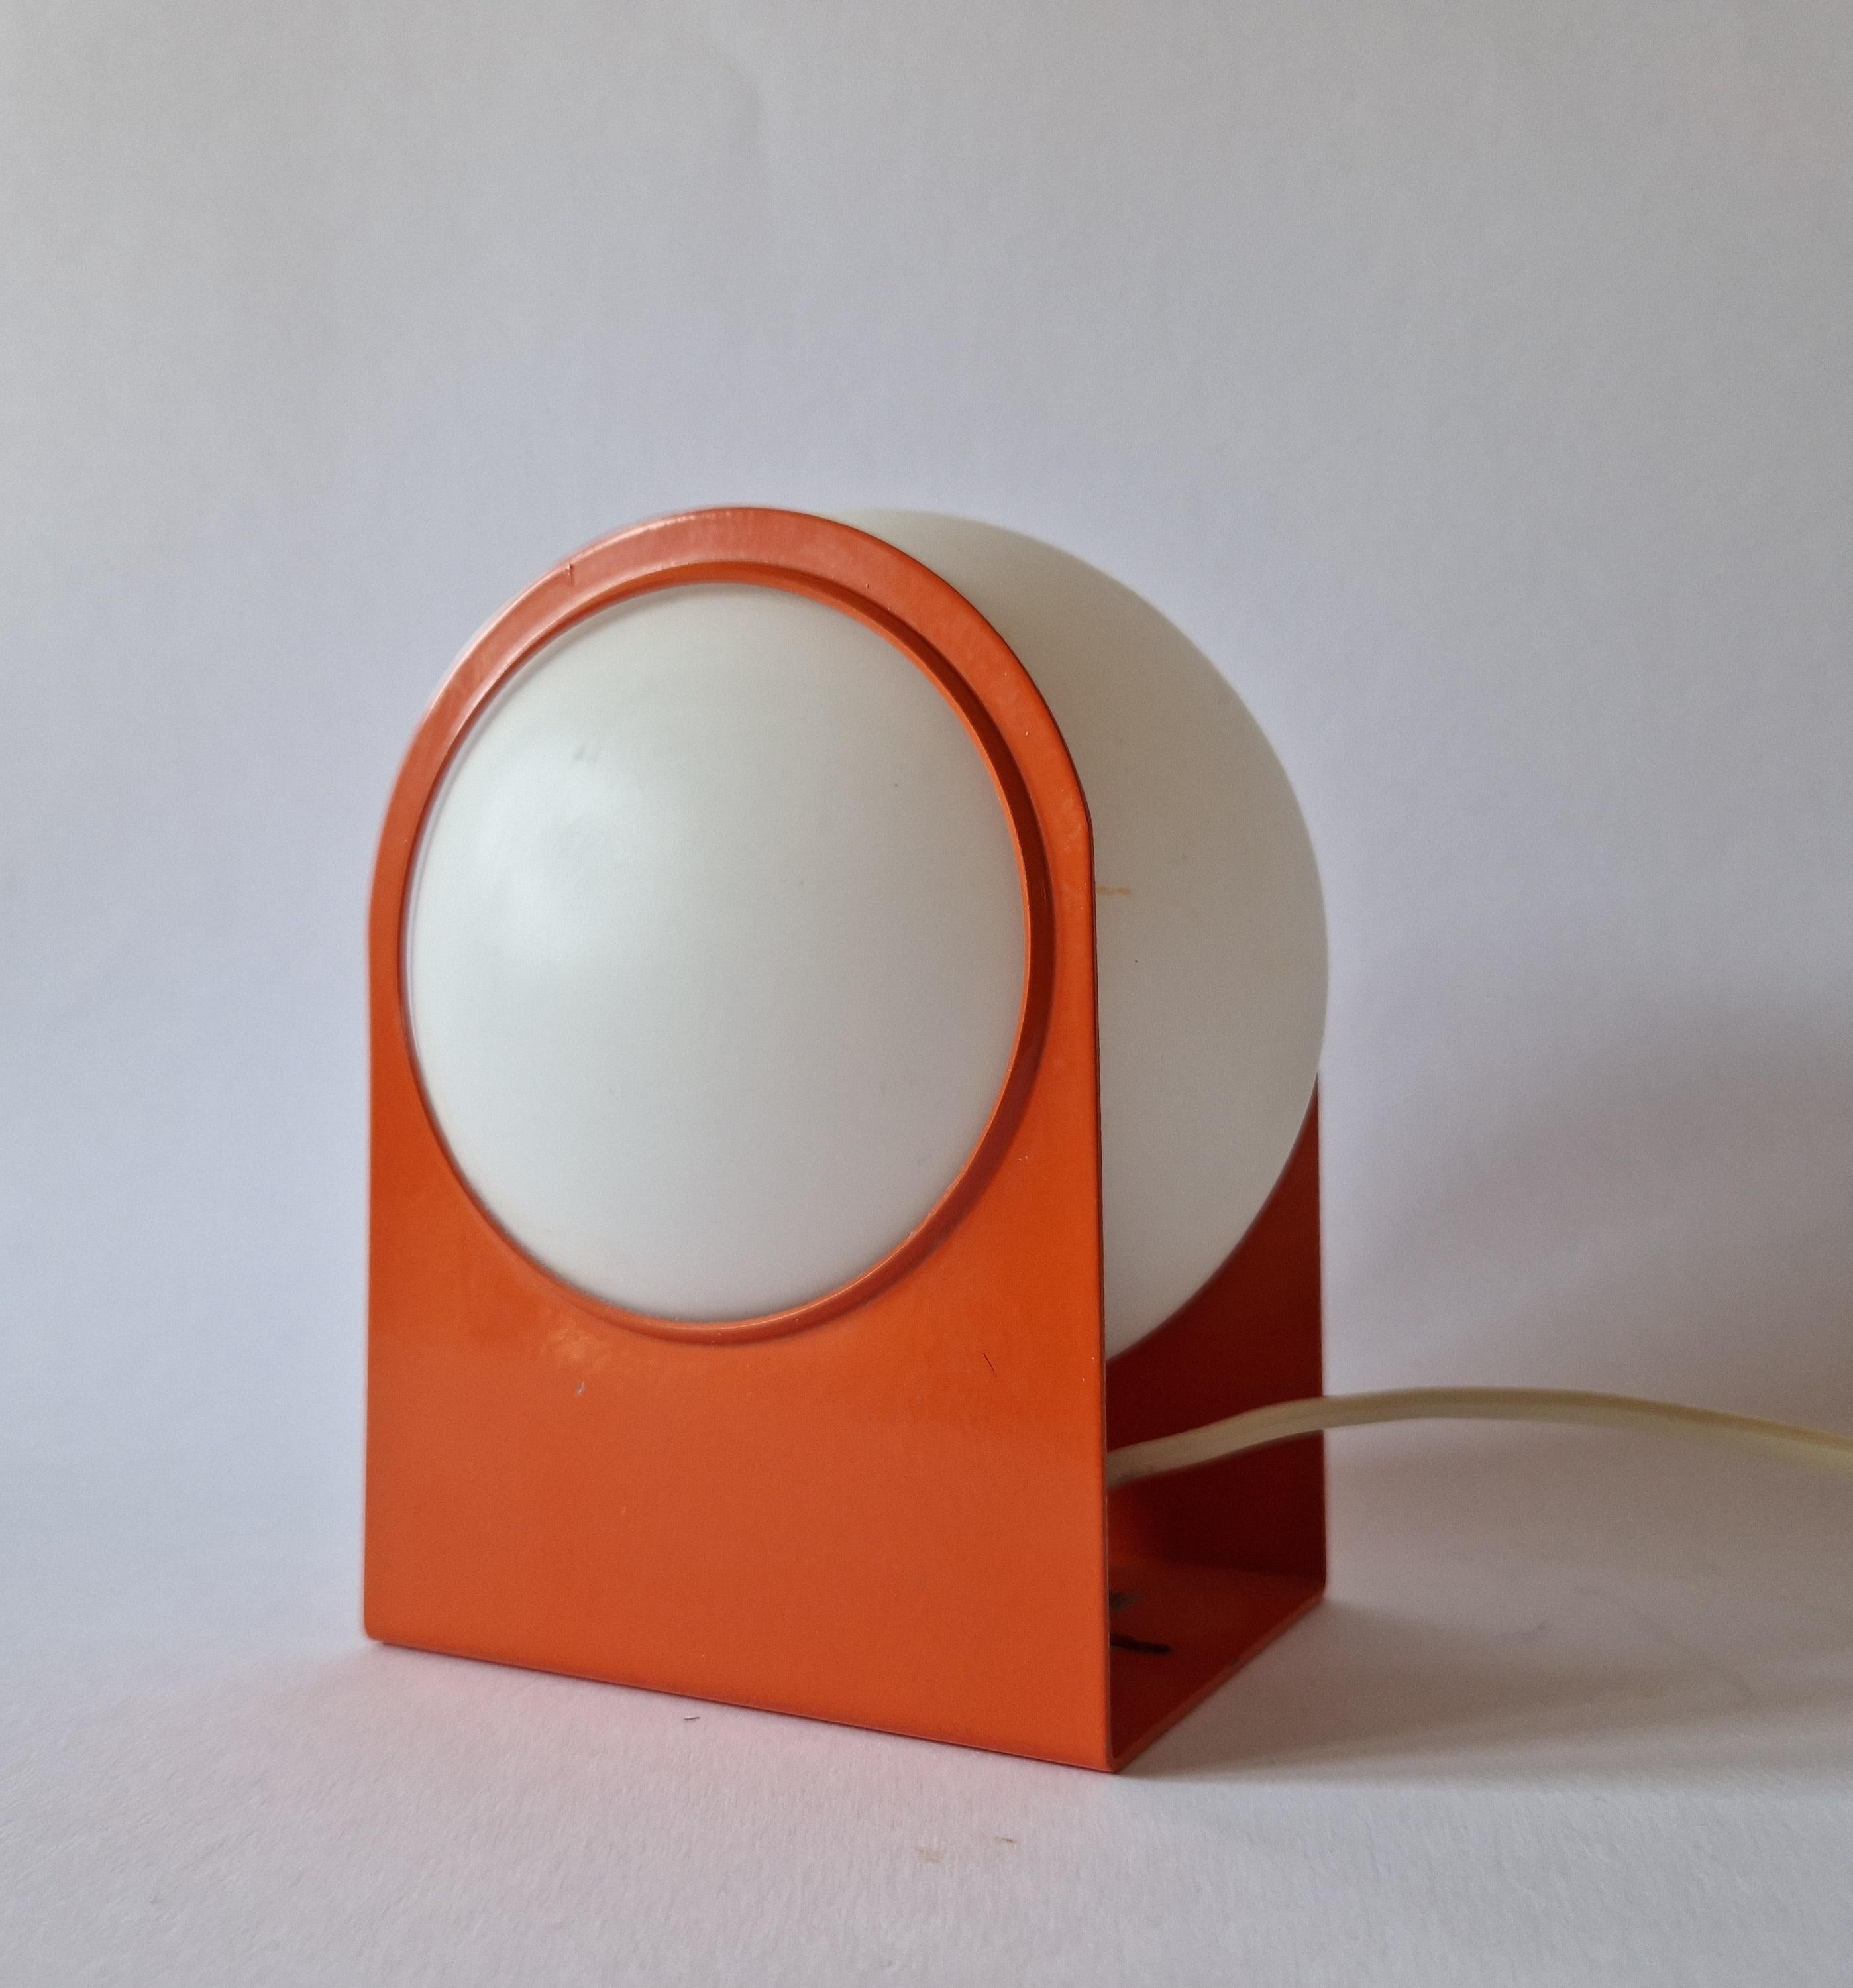 Slovak Midcentury Rare Table or Wall Lamp Pokrok, 1970s For Sale